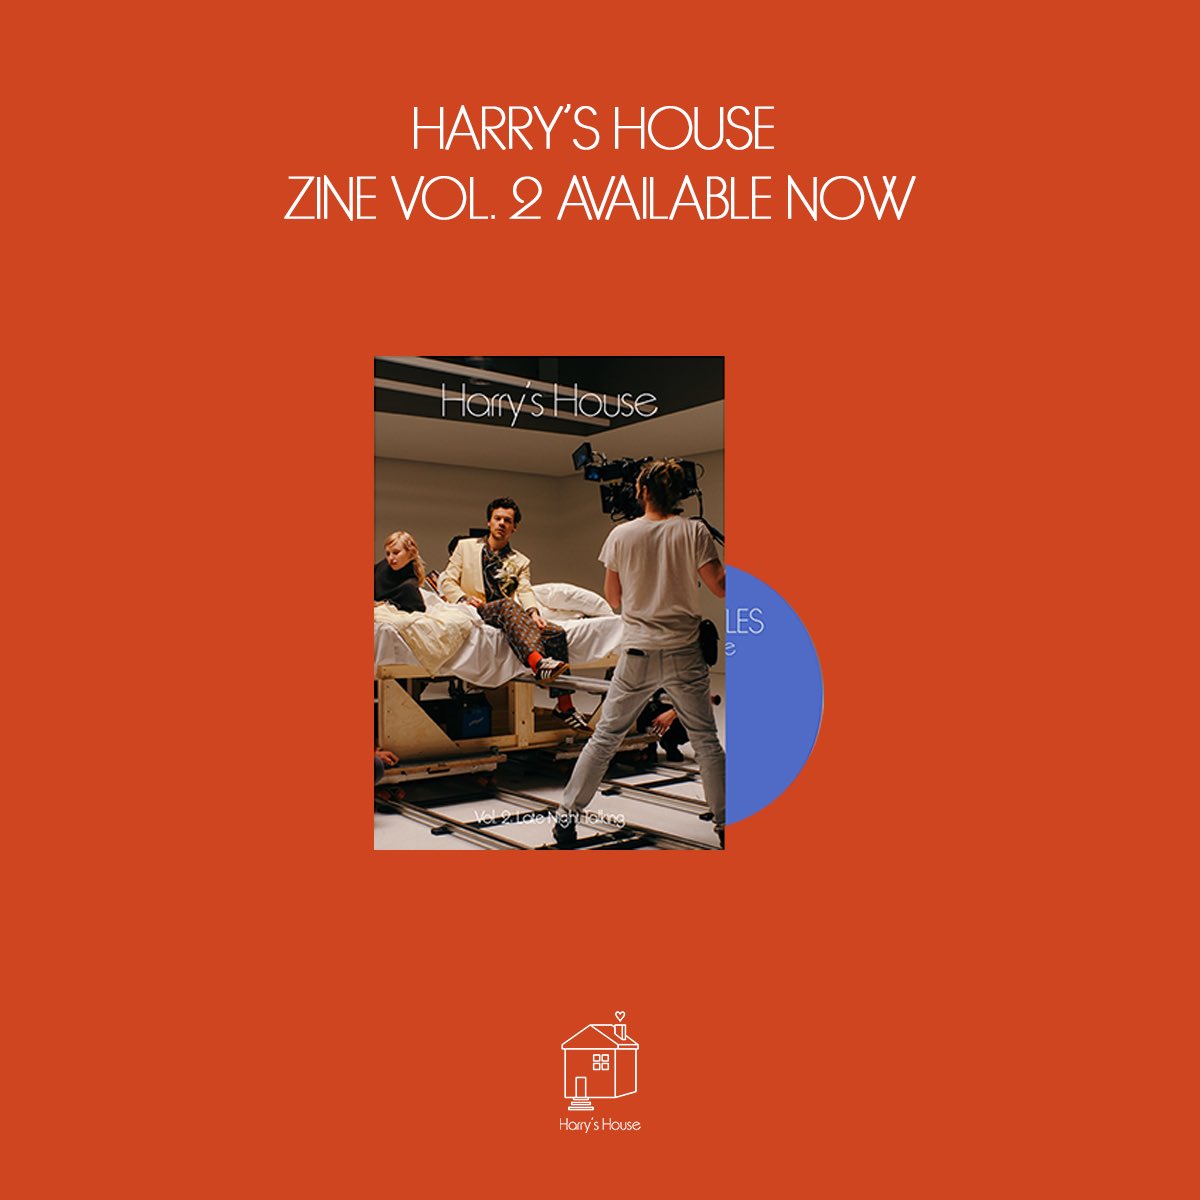 Harry's House Zine Vol. 2 Now Available in the Official Online Store. 

smarturl.it/harryshouse